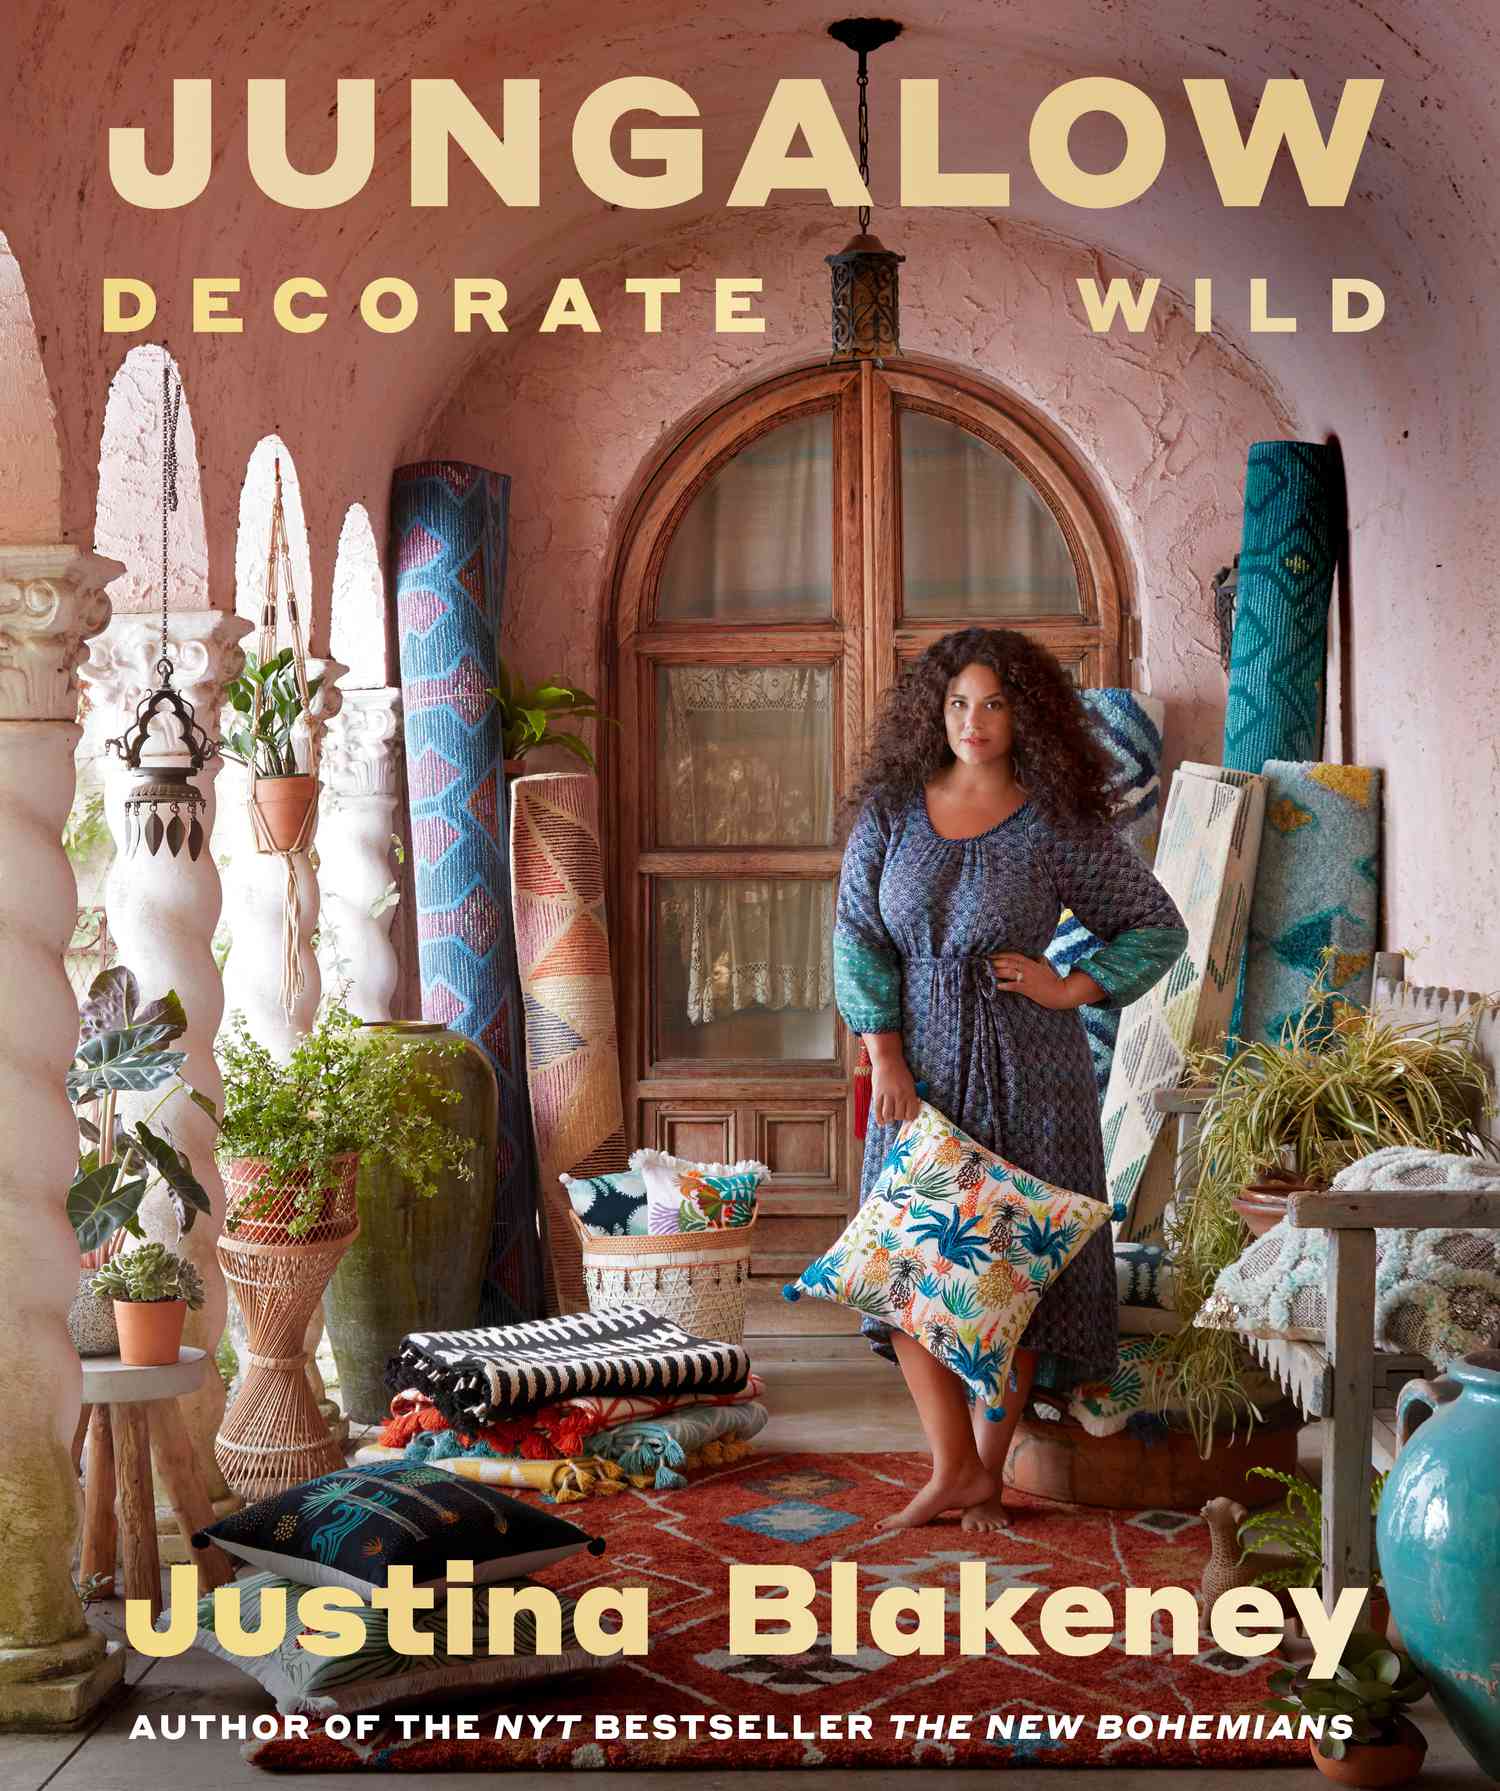 Jungalow Decorate Wild book cover with Justina Blakeney